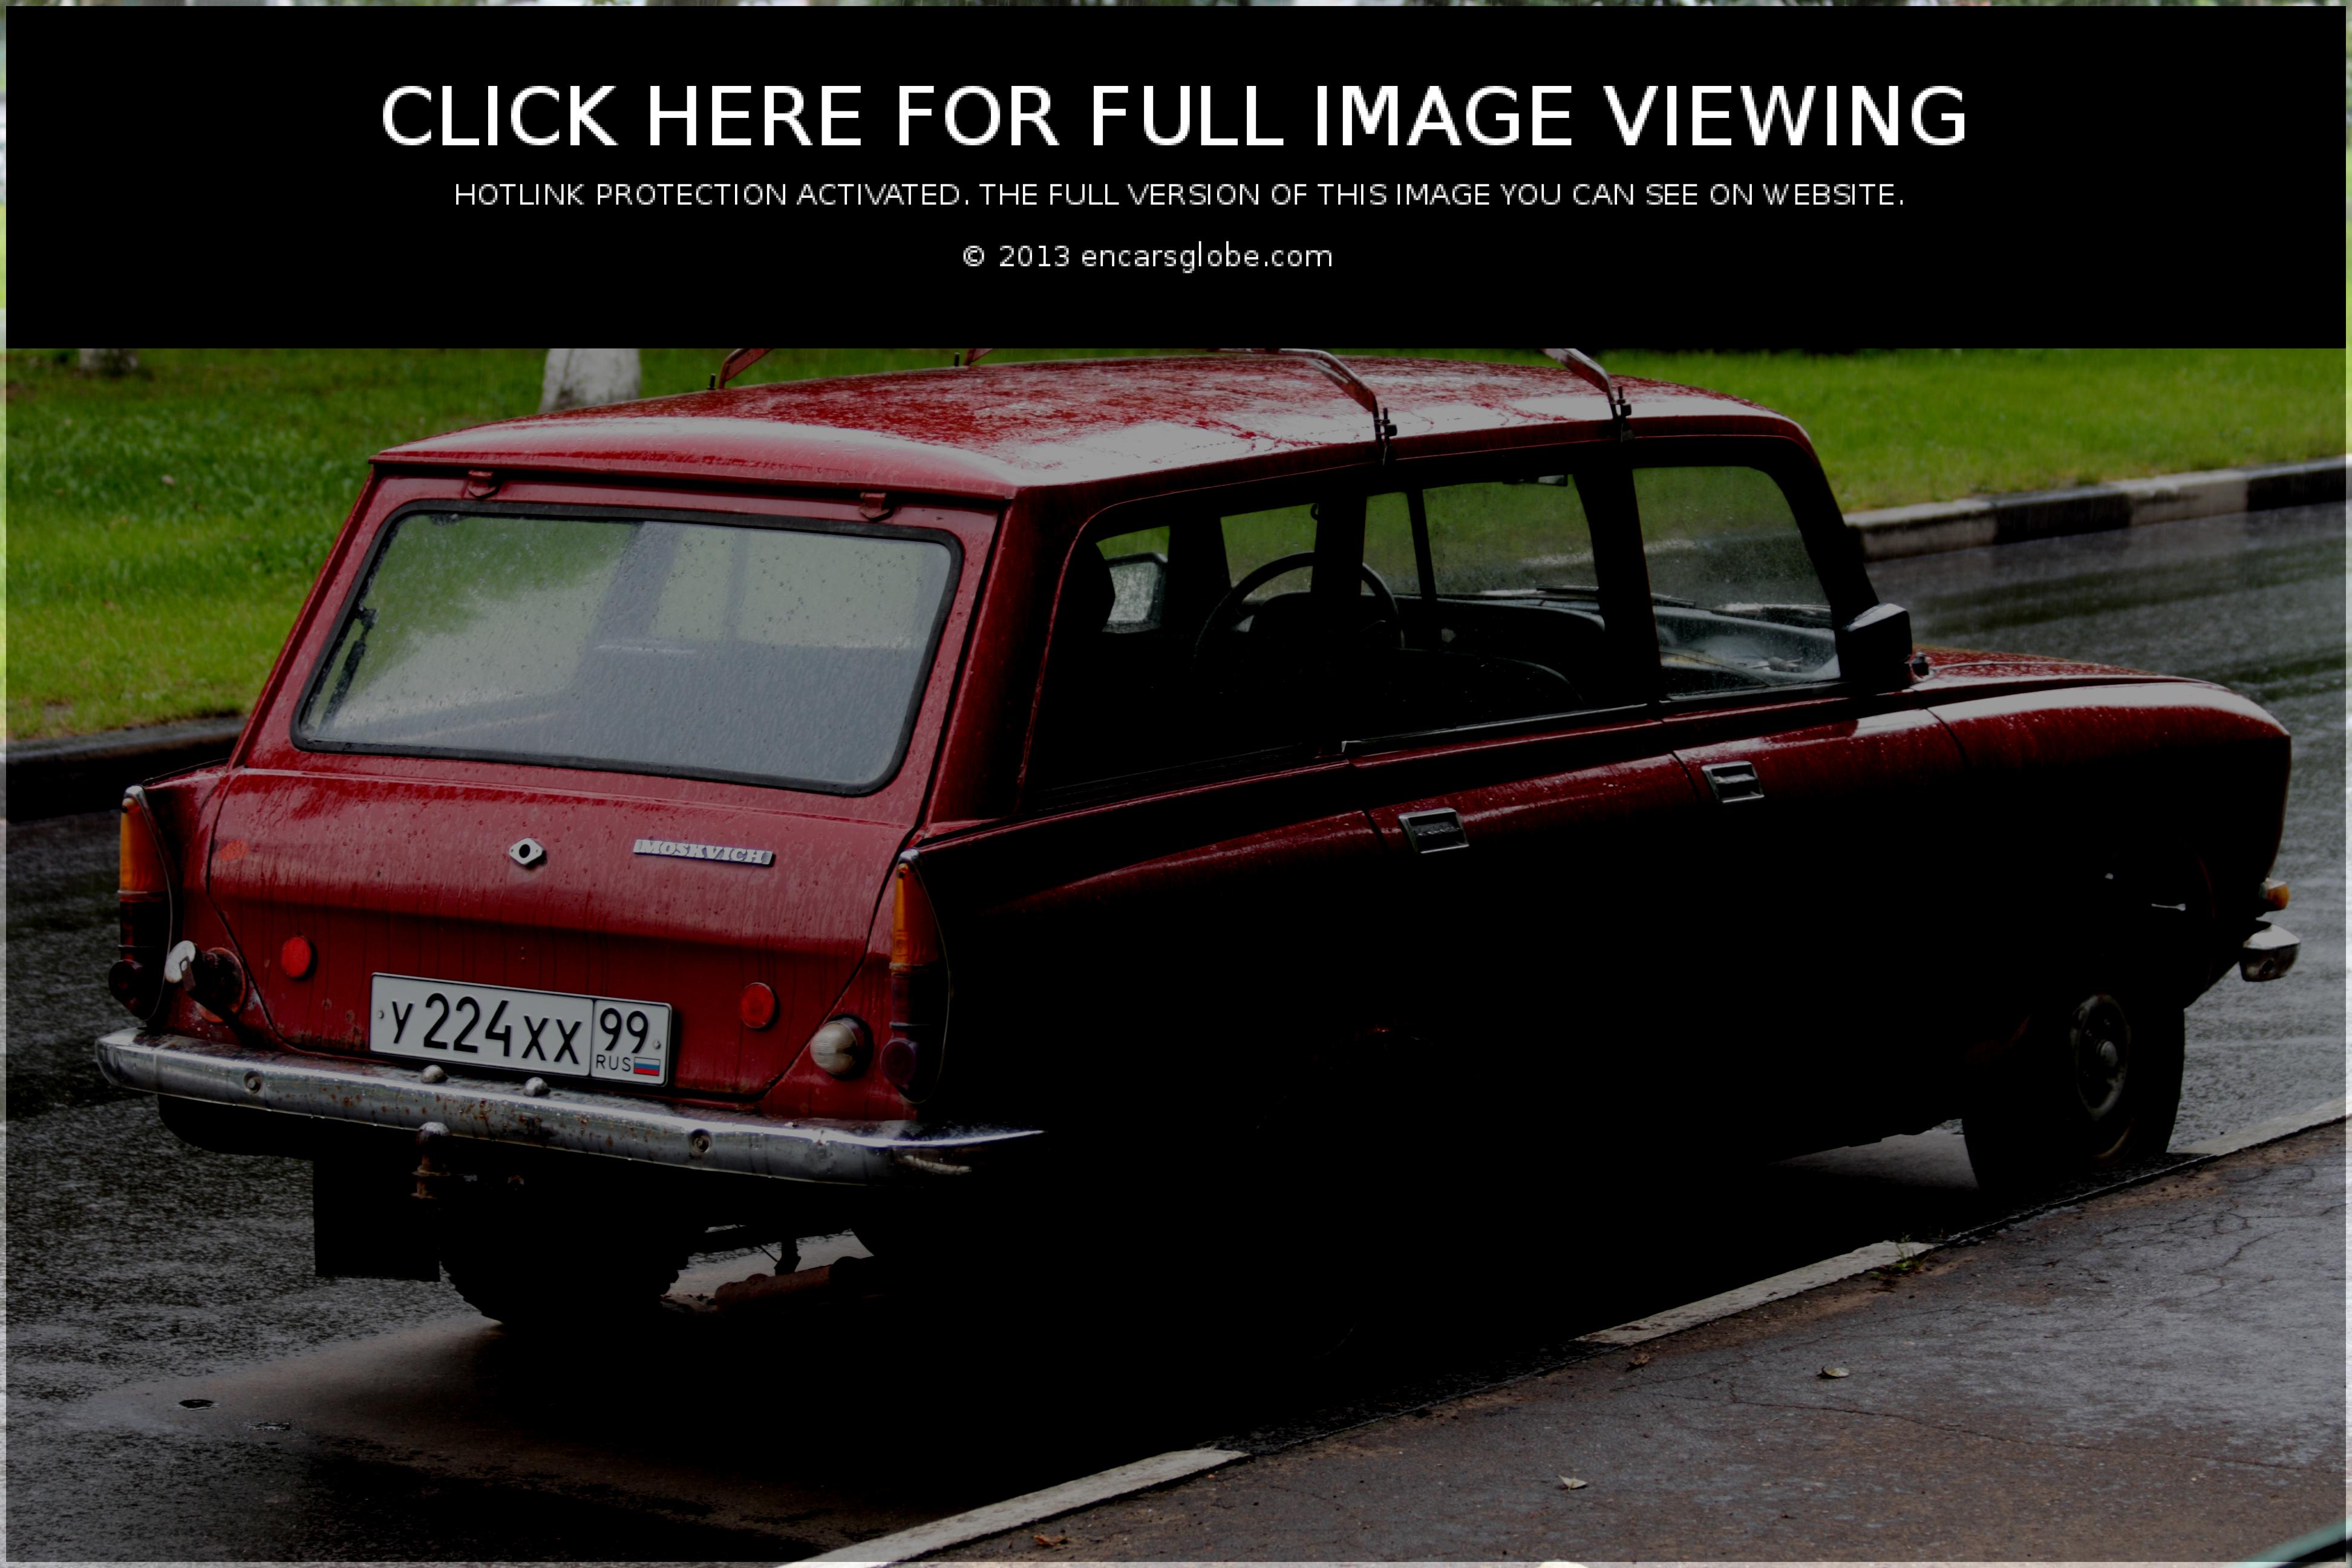 Gallery of all models of Moskvitch: Moskvitch 1500, Moskvitch 1500 ...